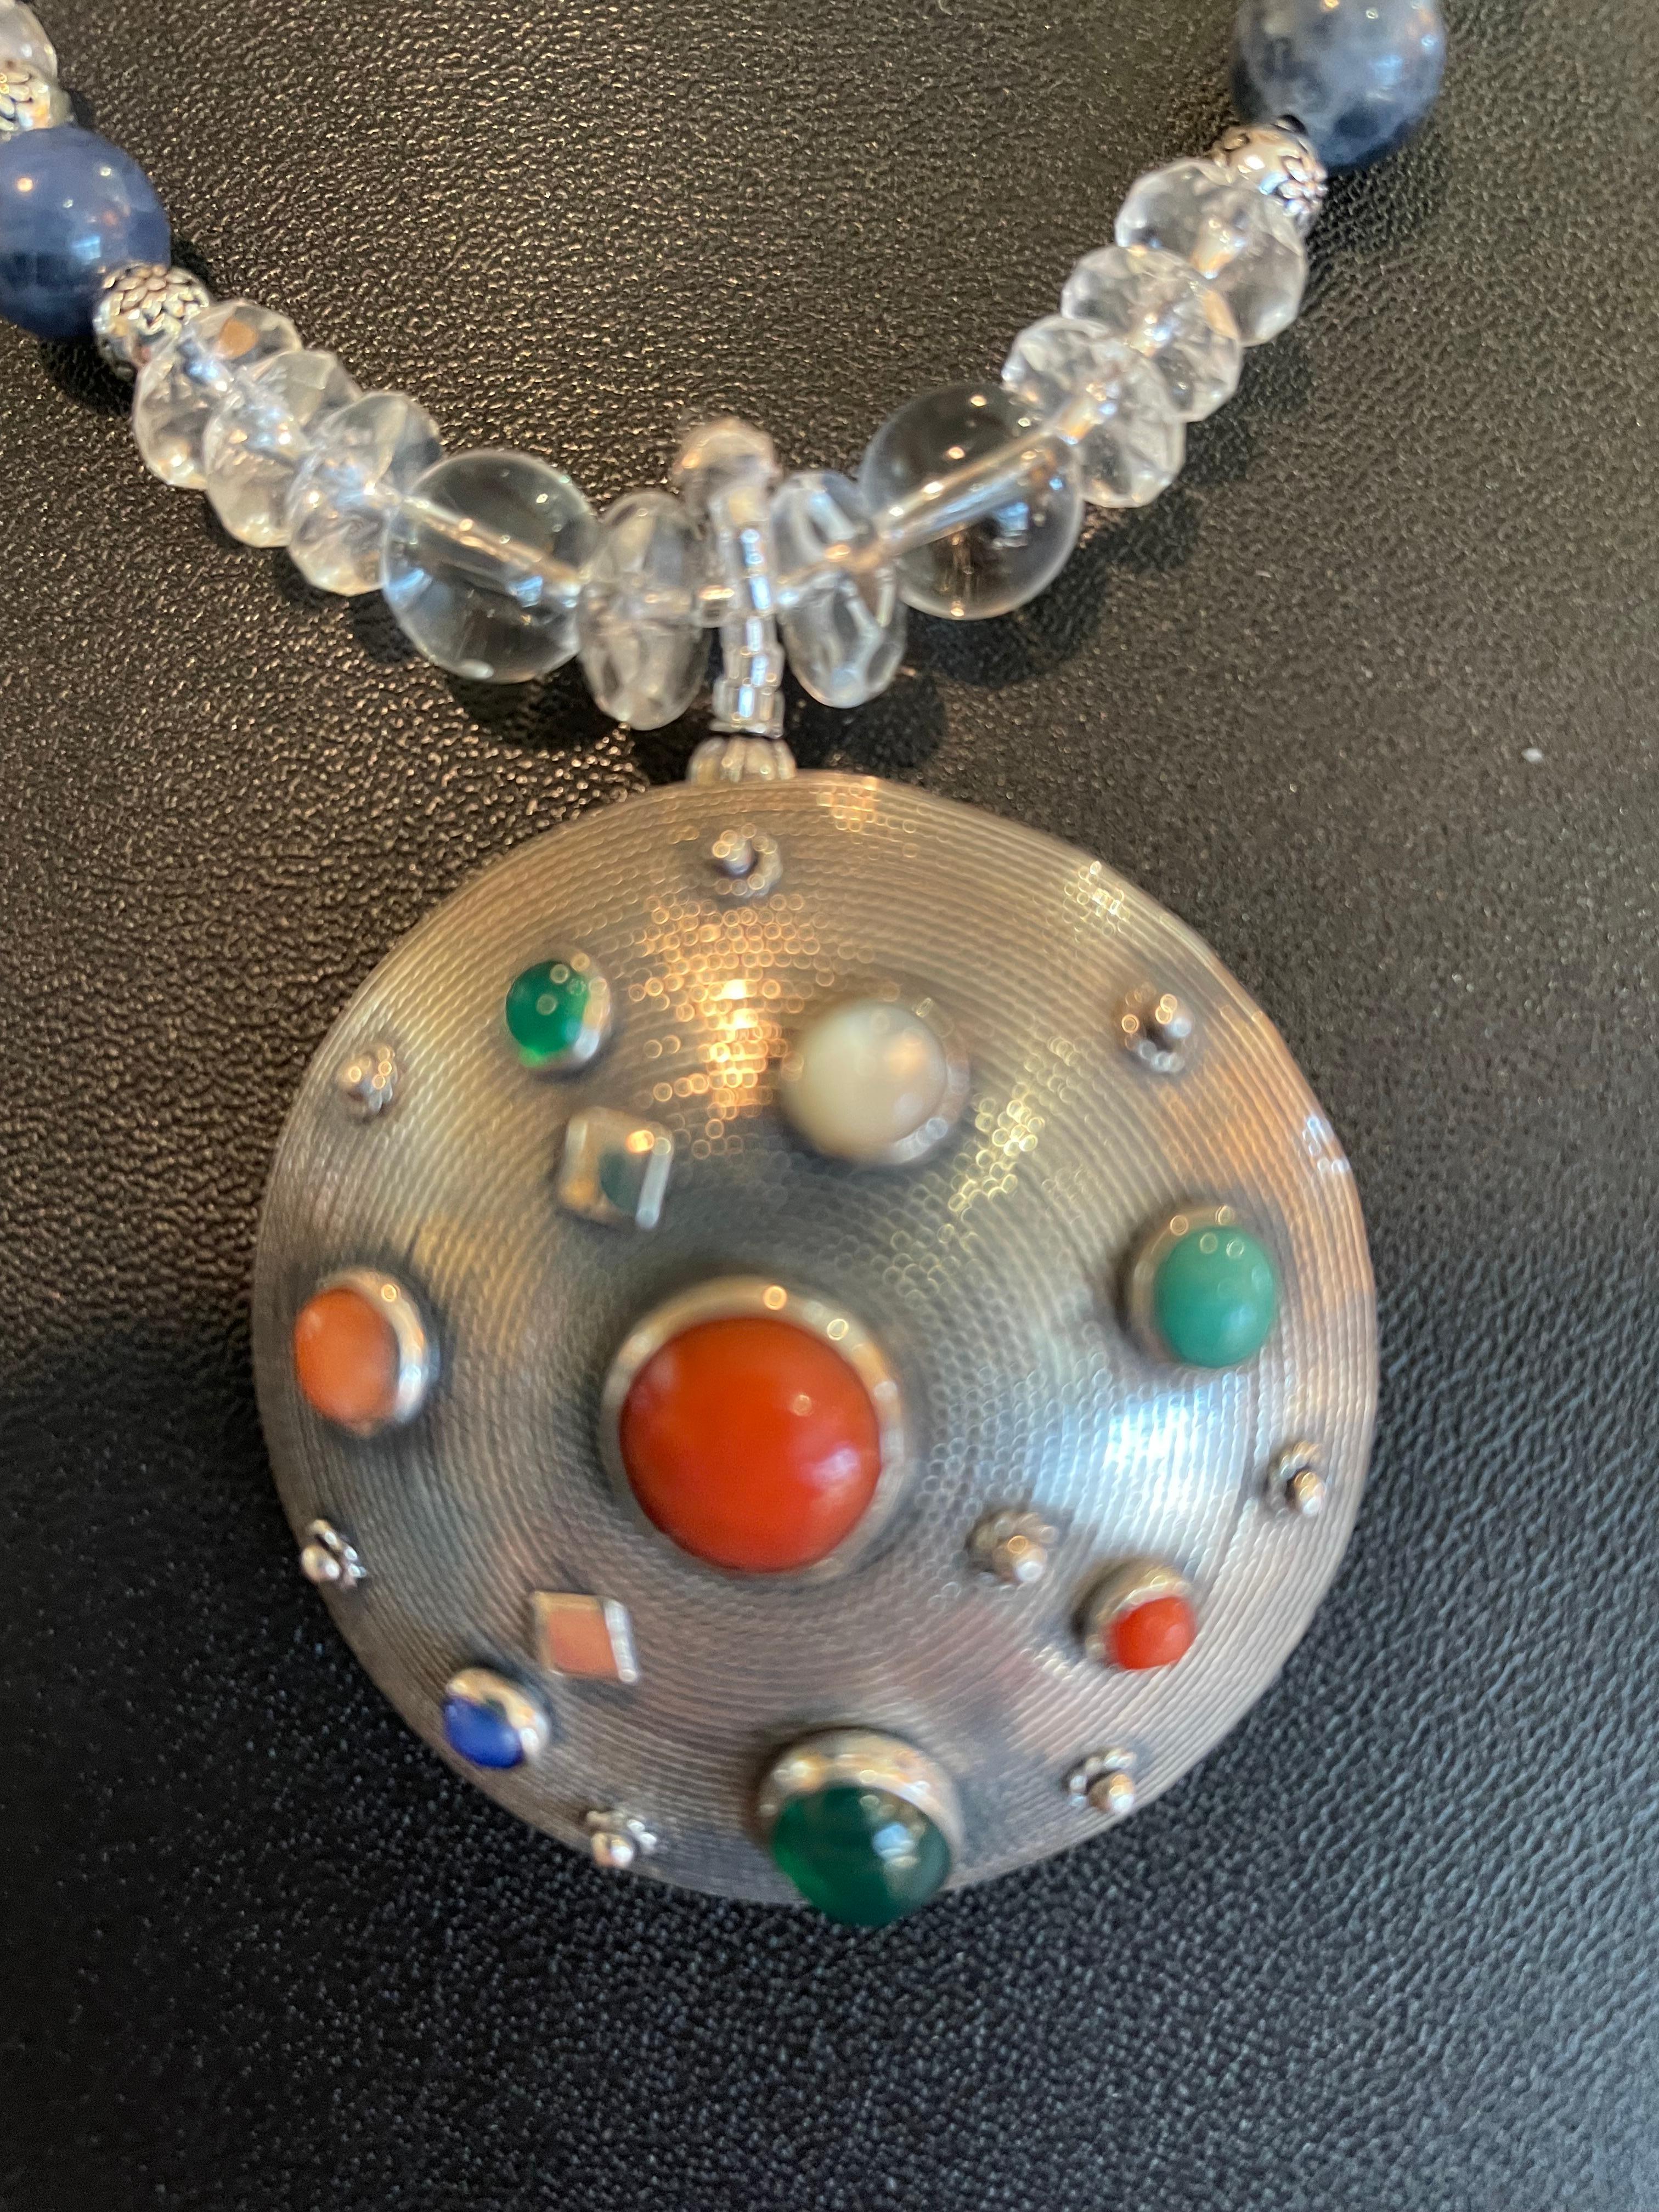 Lorraine’s Bijoux offers a Unique Vintage 70’s Modern Sterling Silver Pendant Necklace. This stunning piece is encrusted with semi precious, cabochon stones in Sterling Silver settings. This piece is Italian made so  the craftsmanship is impeccable